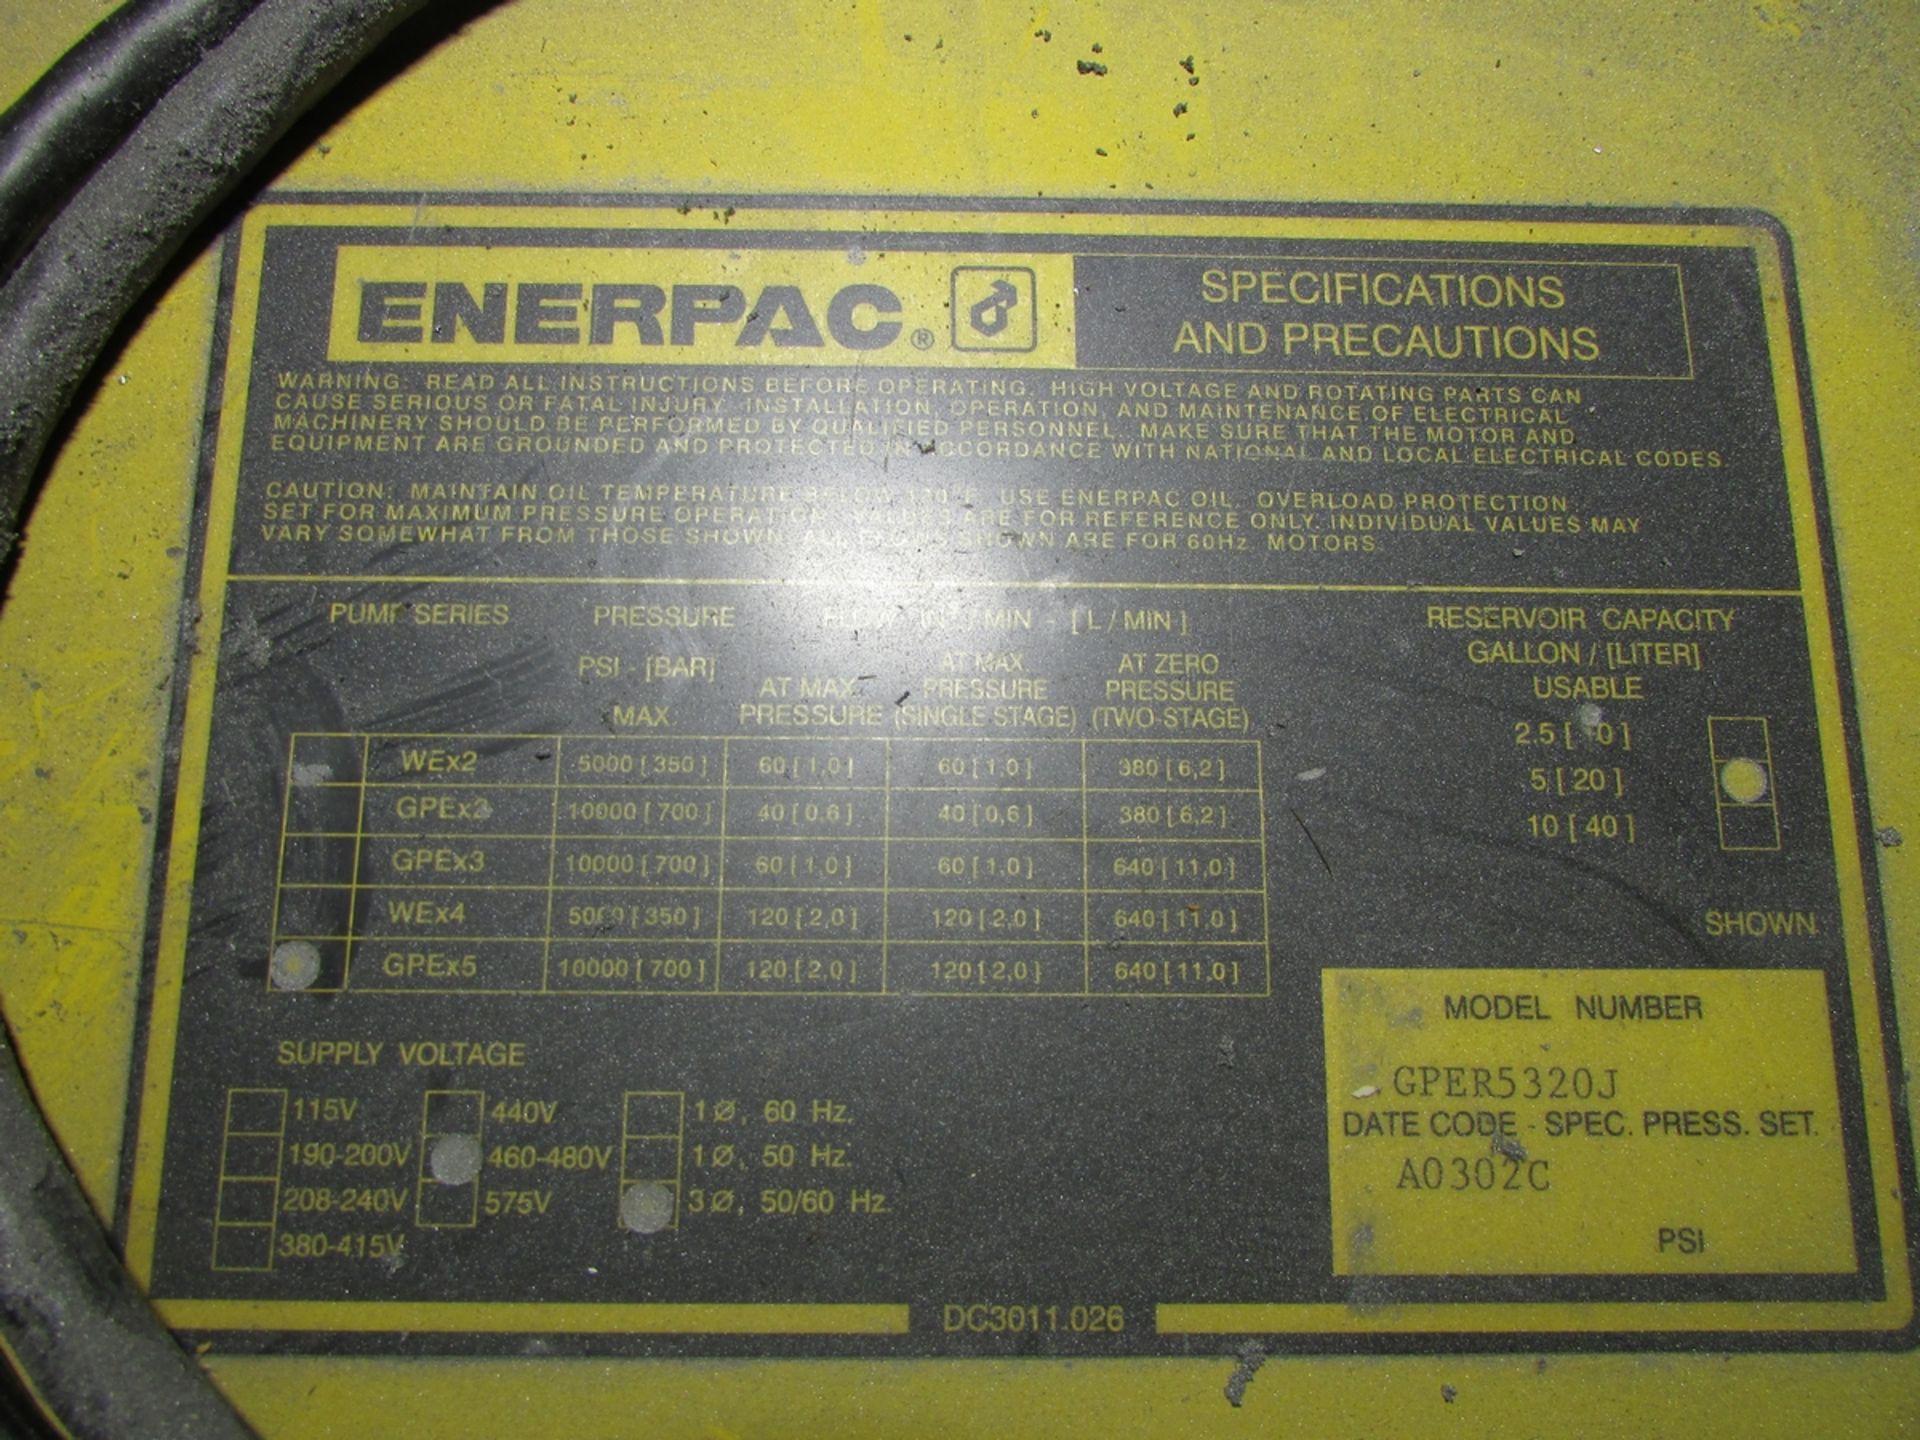 HORIZONTAL HYDRAULIC STRAIGHTENING PRESS, 30" X 9" ANGLE PLATE, 80" X 30" TABLE, ENERPAC GPER5320J - Image 8 of 12